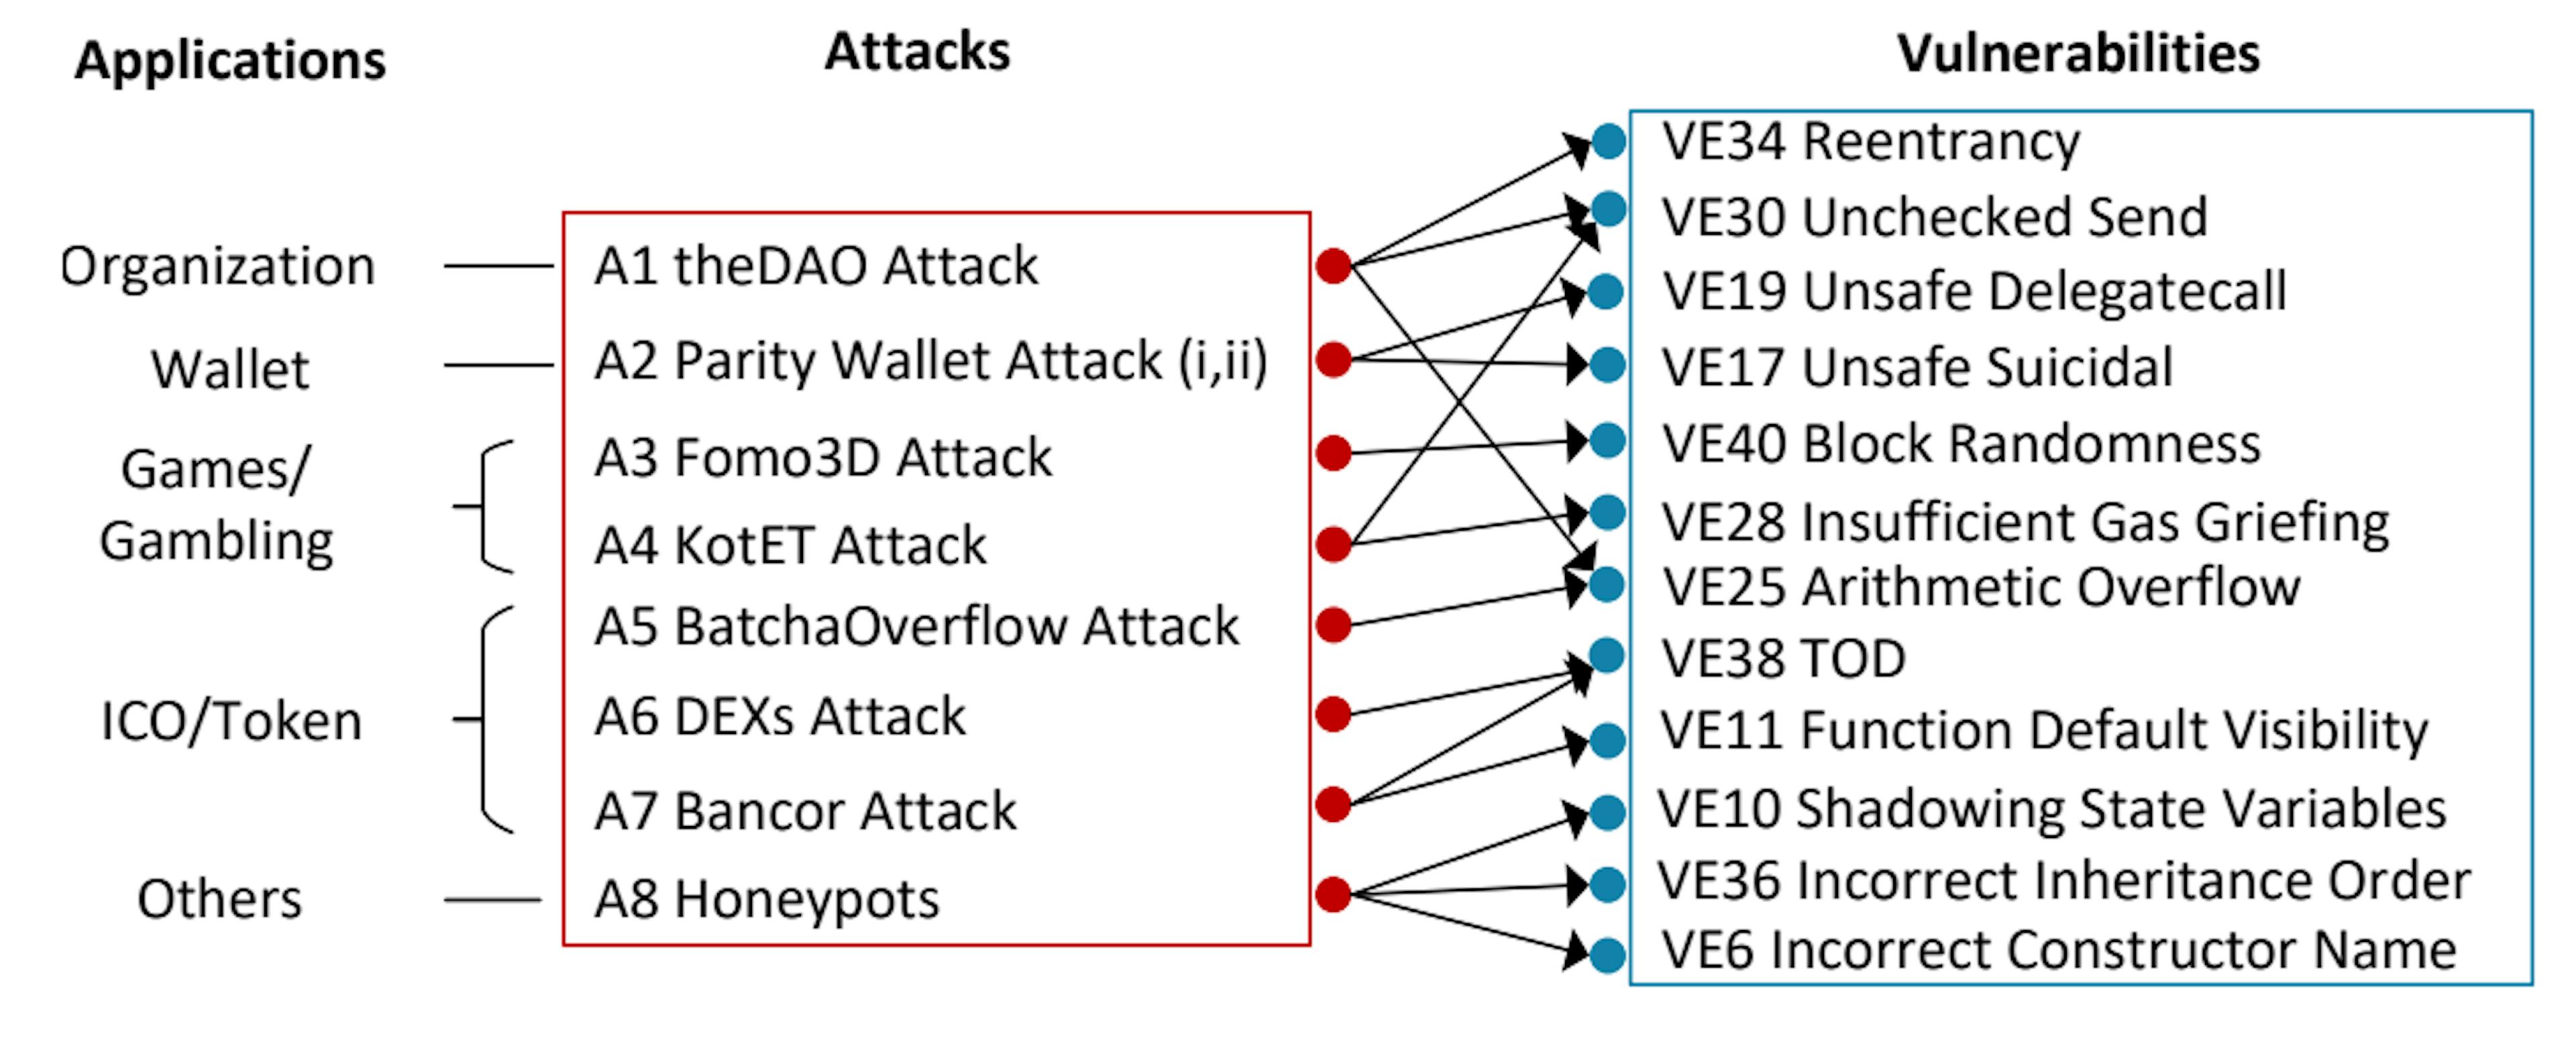 Fig. 5. The relationships between attacks and vulnerabilities